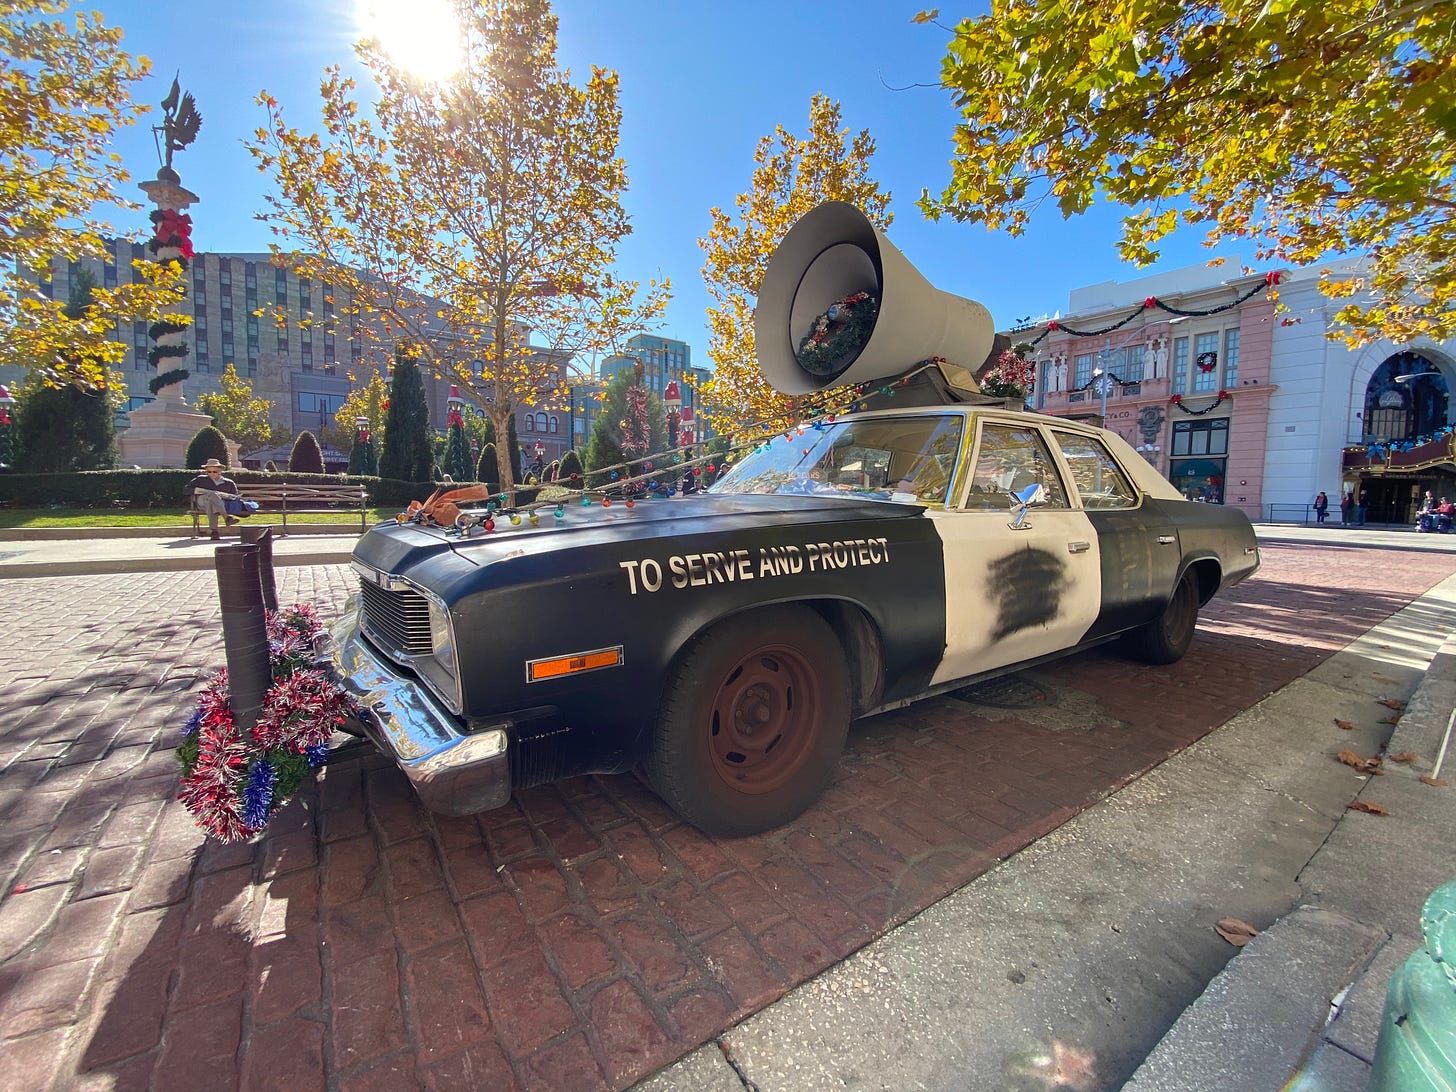 Blues Brothers Bluesmobile car at Universal Orlando during Christmas